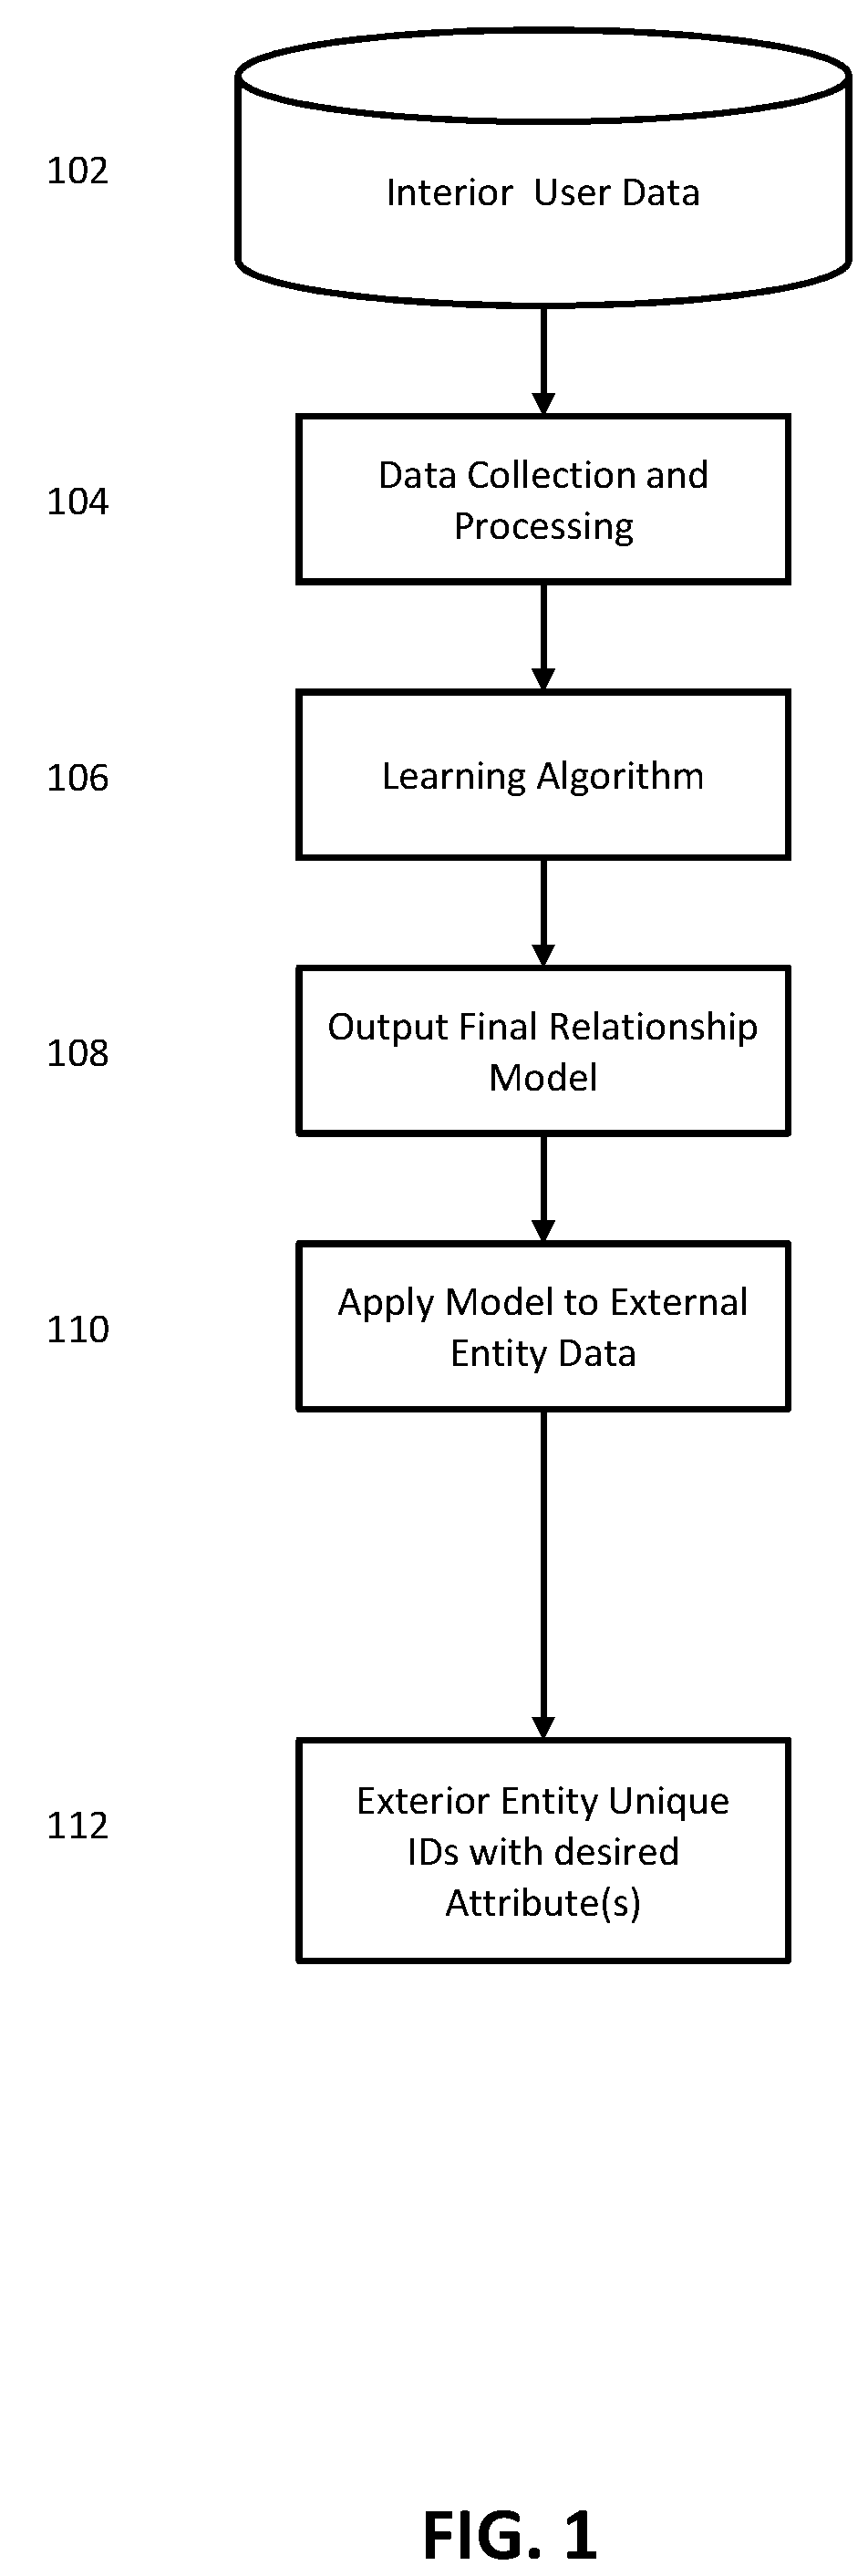 Systems and methods for generating a relationship among a plurality of datasets to generate a desired attribute value